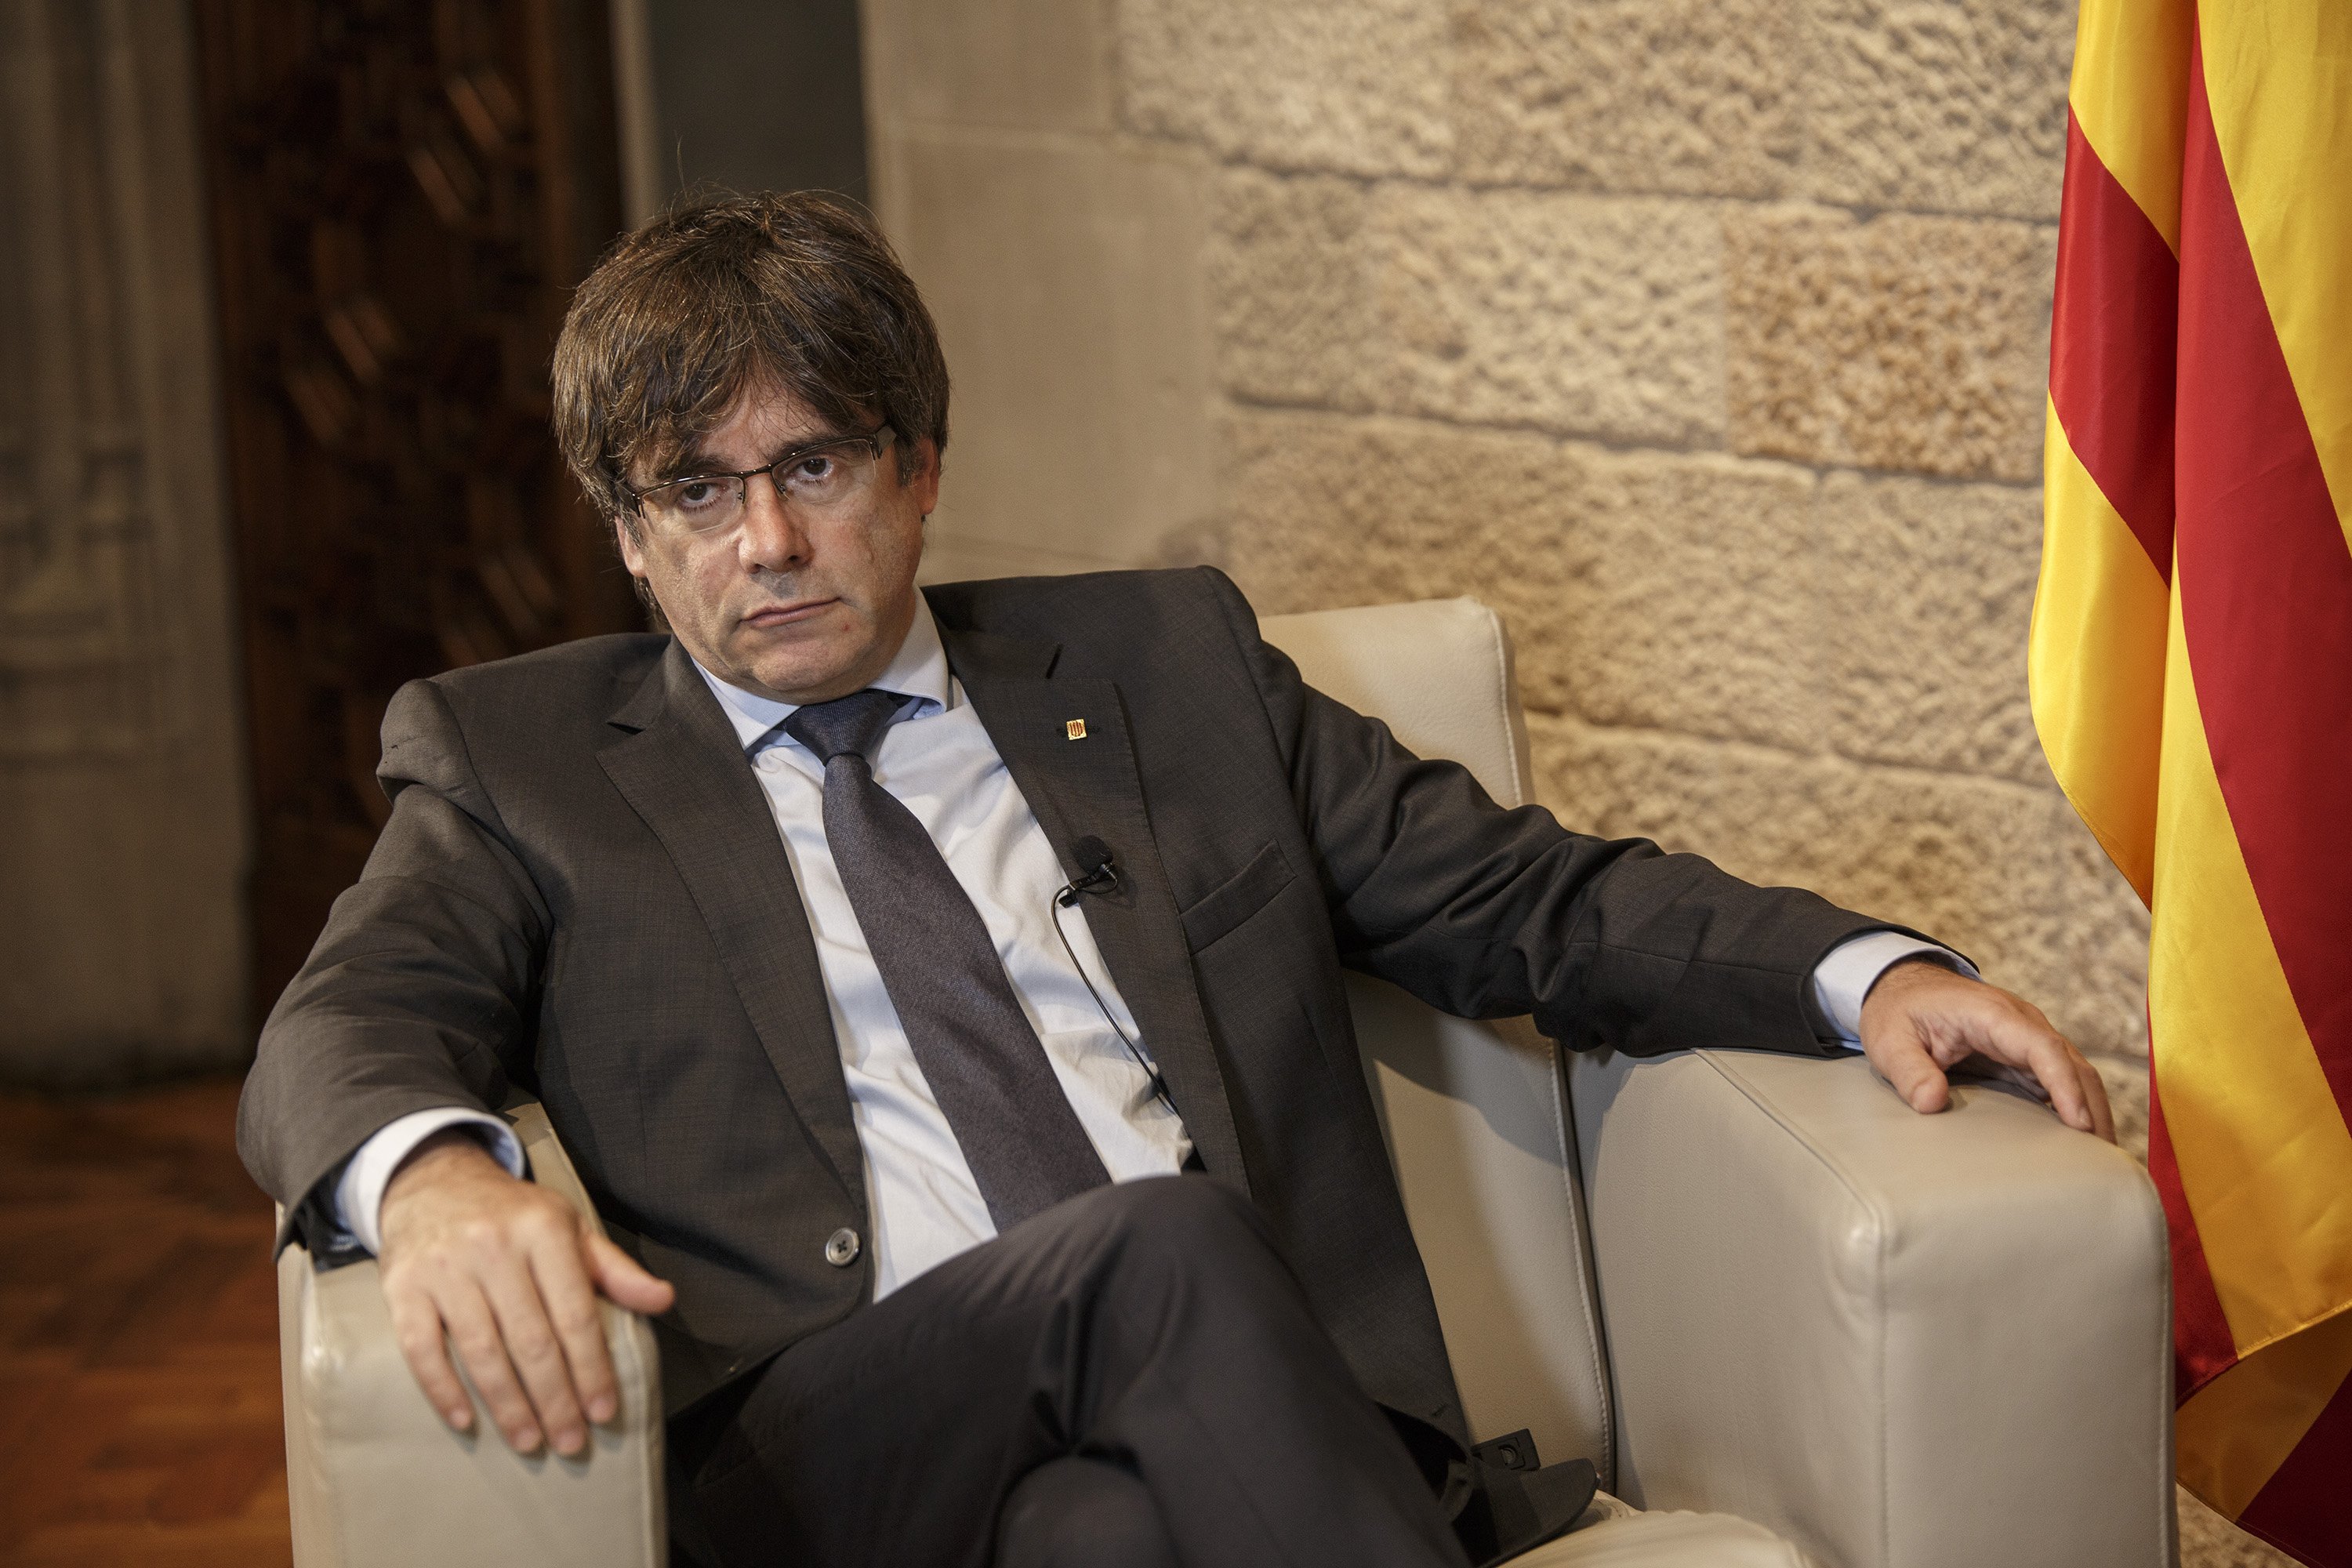 Puigdemont: "The State no longer has any basis for an intervention by the Mossos"